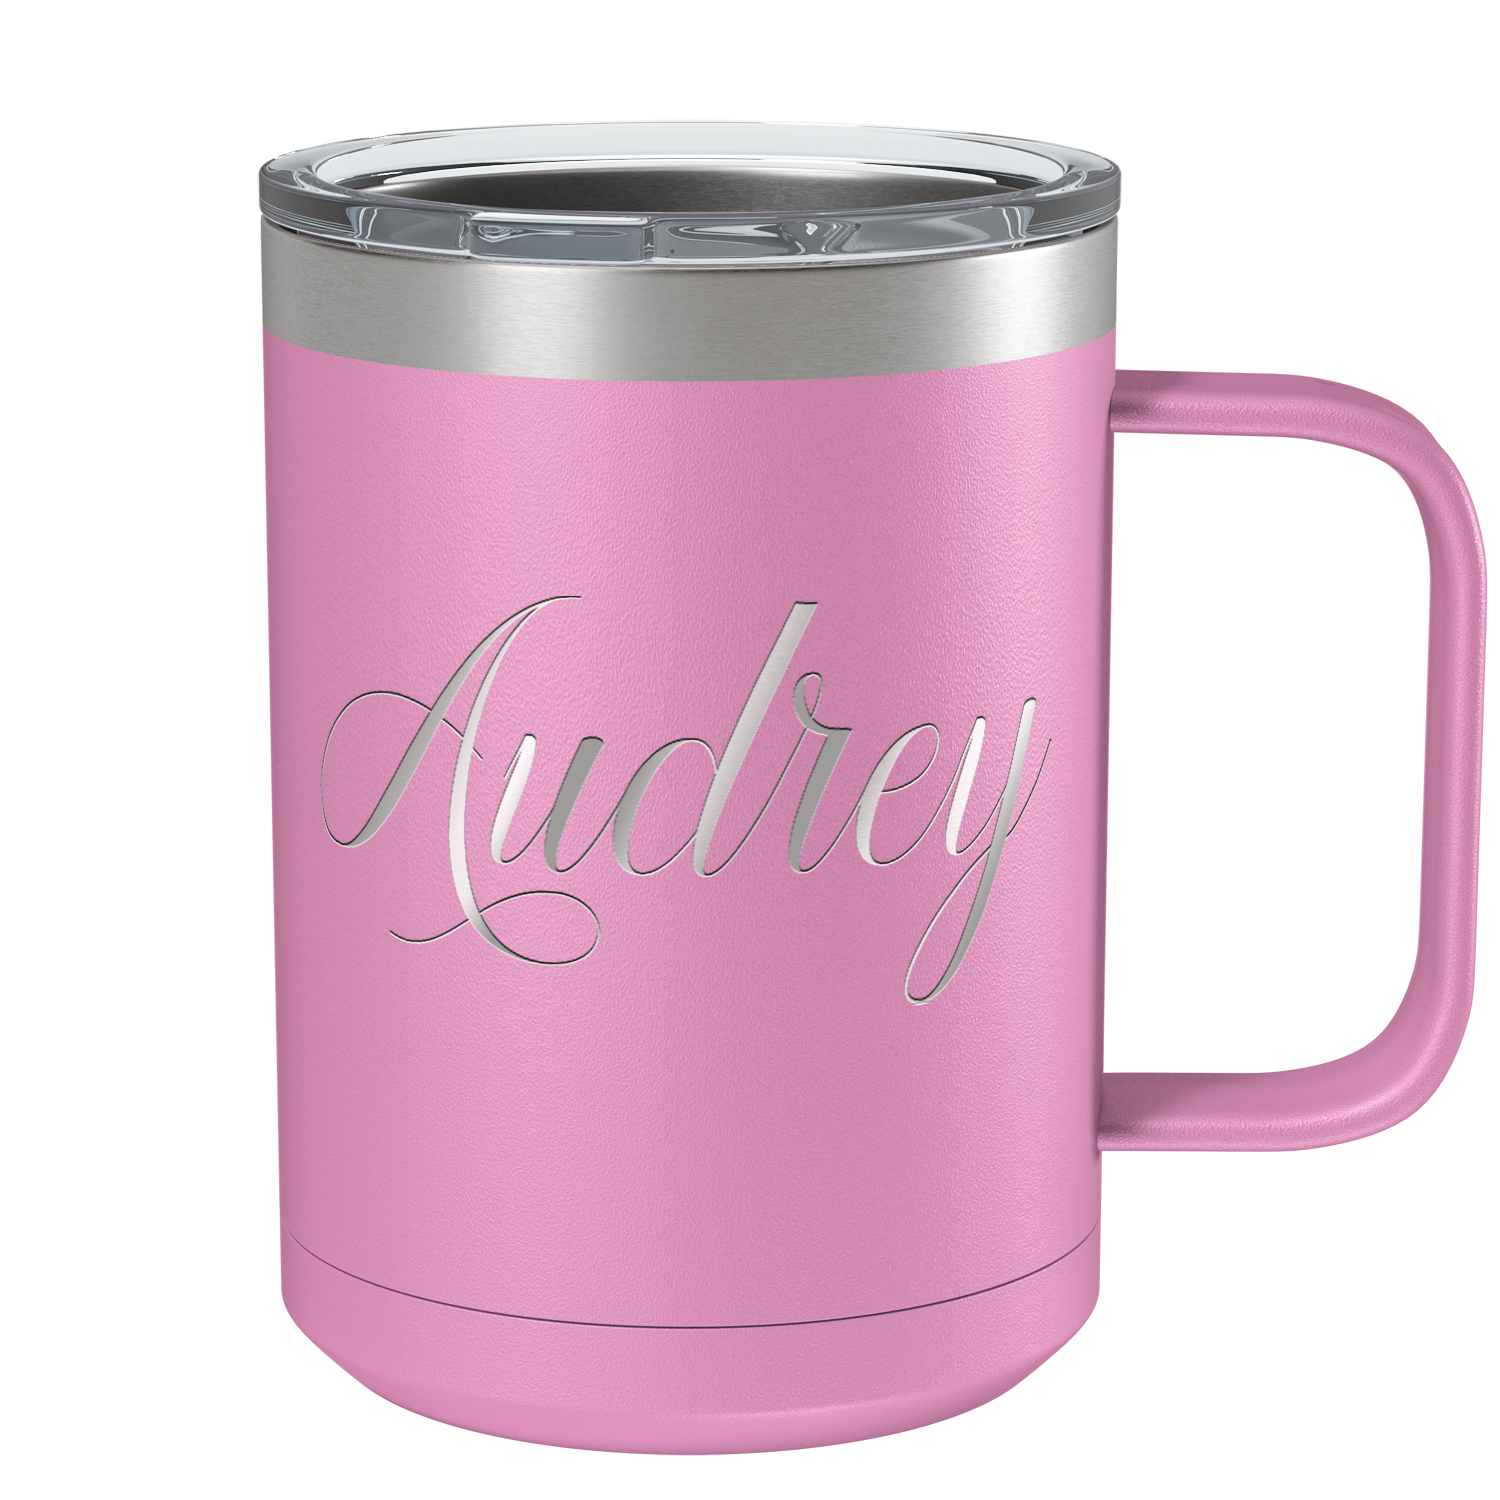 Cuptify Personalized Engraved 15 oz Stainless Steel Coffee Mug - Blush